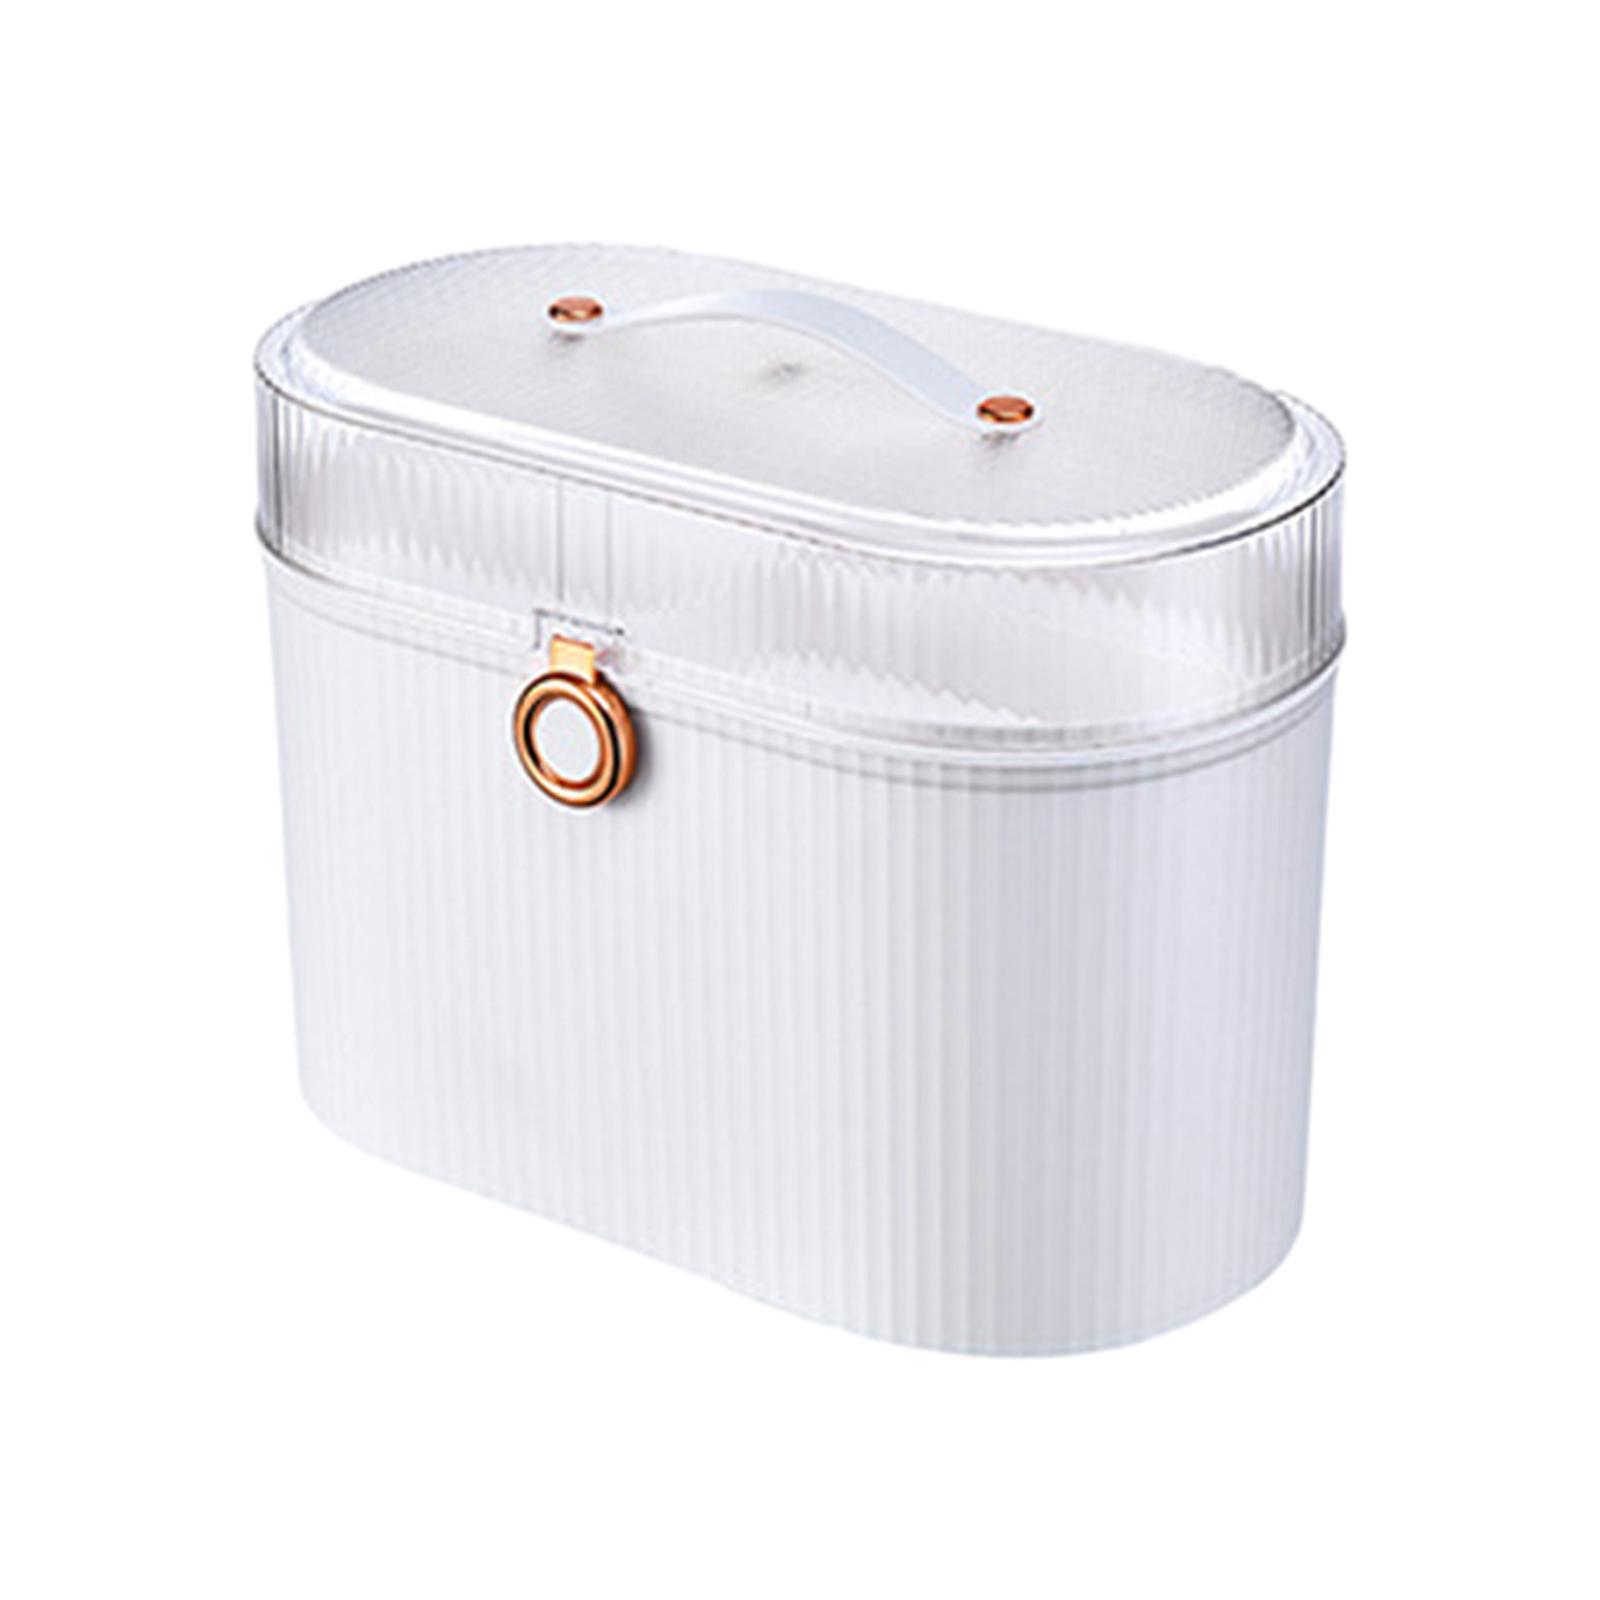 Home Organiser Storage Box Organization Bin with Lid and Handle Two Compartments for Jewelry Crafts Kids Toy Household Family